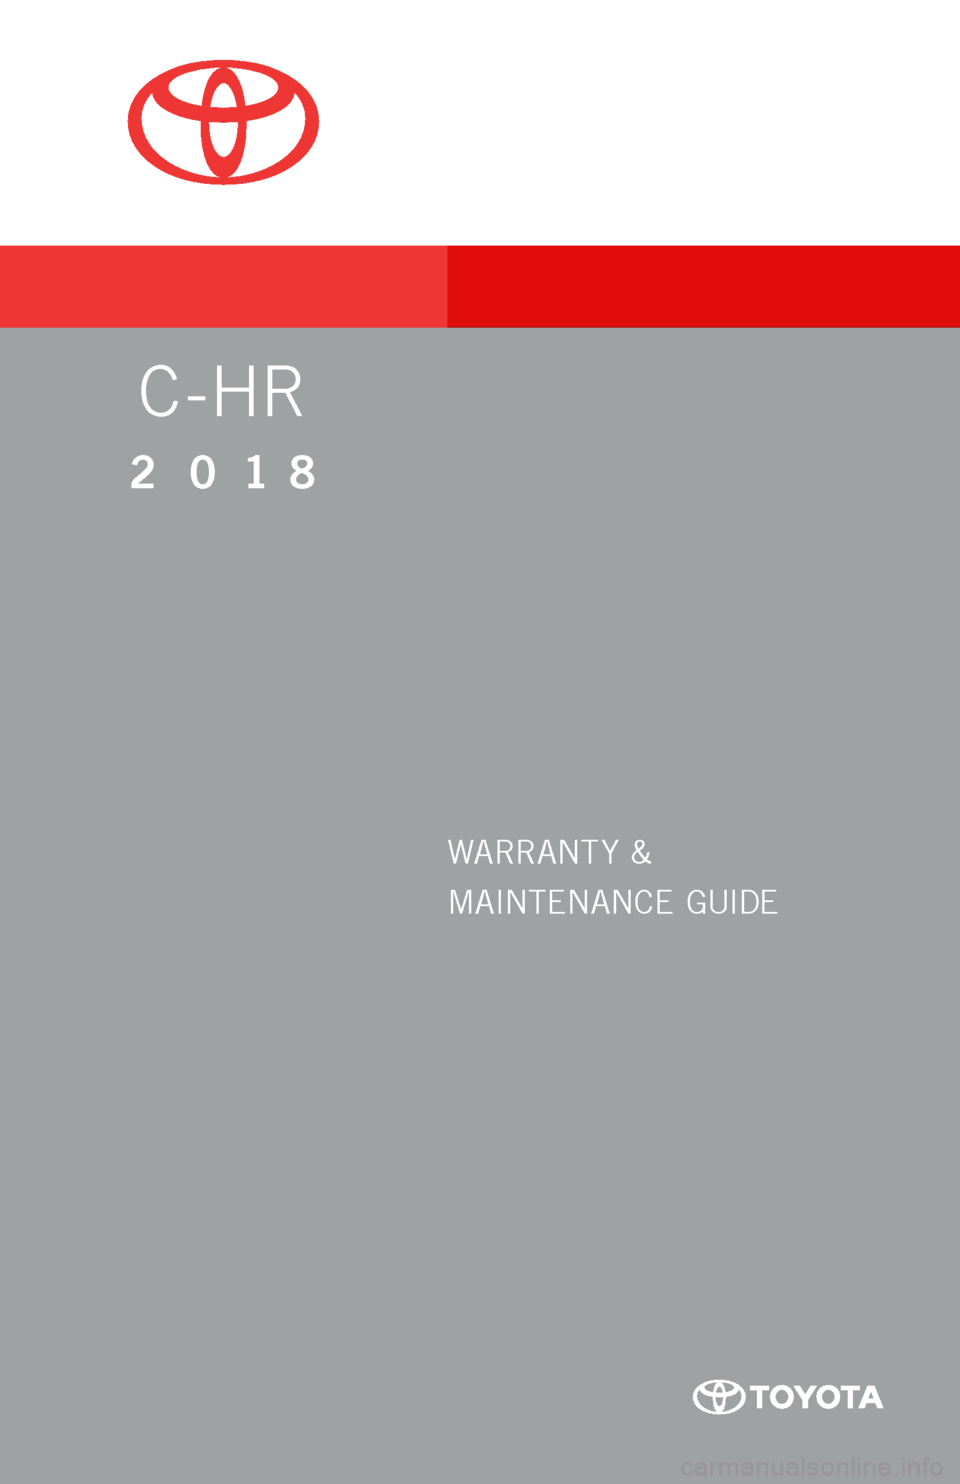 TOYOTA C-HR 2018 1.G Warranty And Maintenance Guide WARRANT Y &
MAINTENANCE  GUIDE
WARRANT Y
 &
MAINTENANCE  GUIDE
C -HR
C -HR
2018
2 018
16-TCS-09944_WarrMaintGuide_C-HR_COVER_2_0F_lm.indd   21/17/17   8:19 PM   